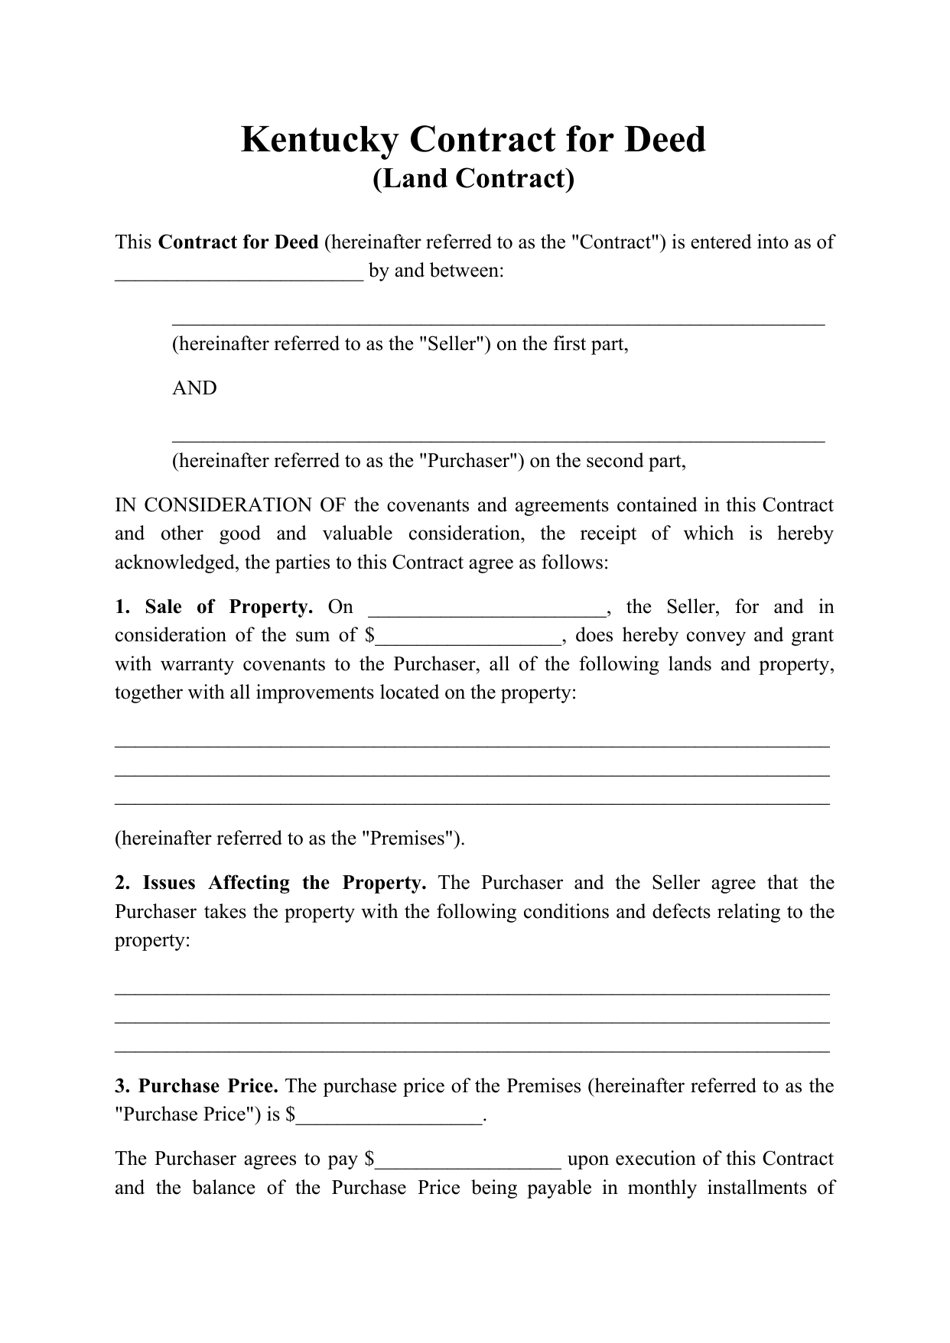 kentucky-contract-for-deed-land-contract-download-printable-pdf